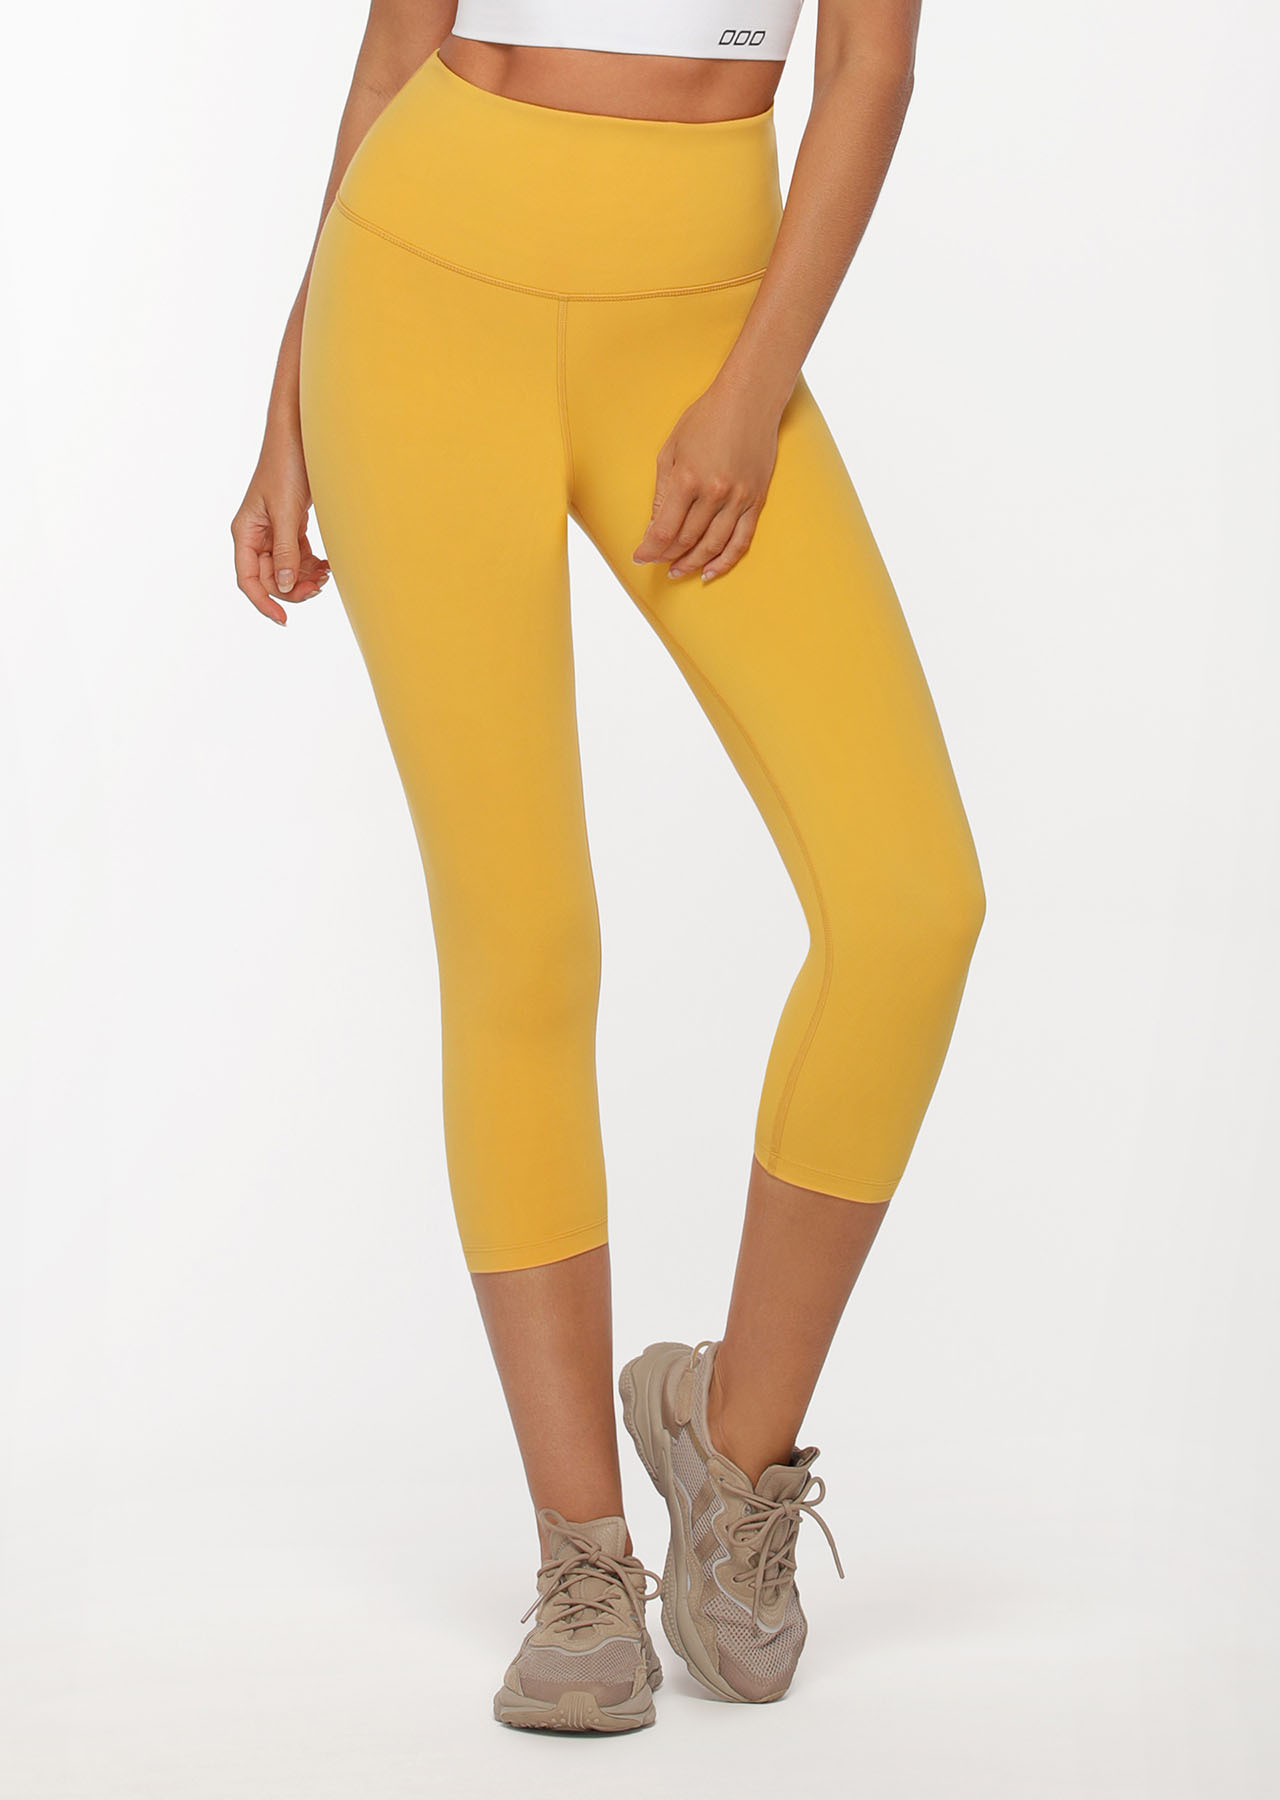 Daffodil Yellow High Waisted Leggings with Pockets | HAVAH